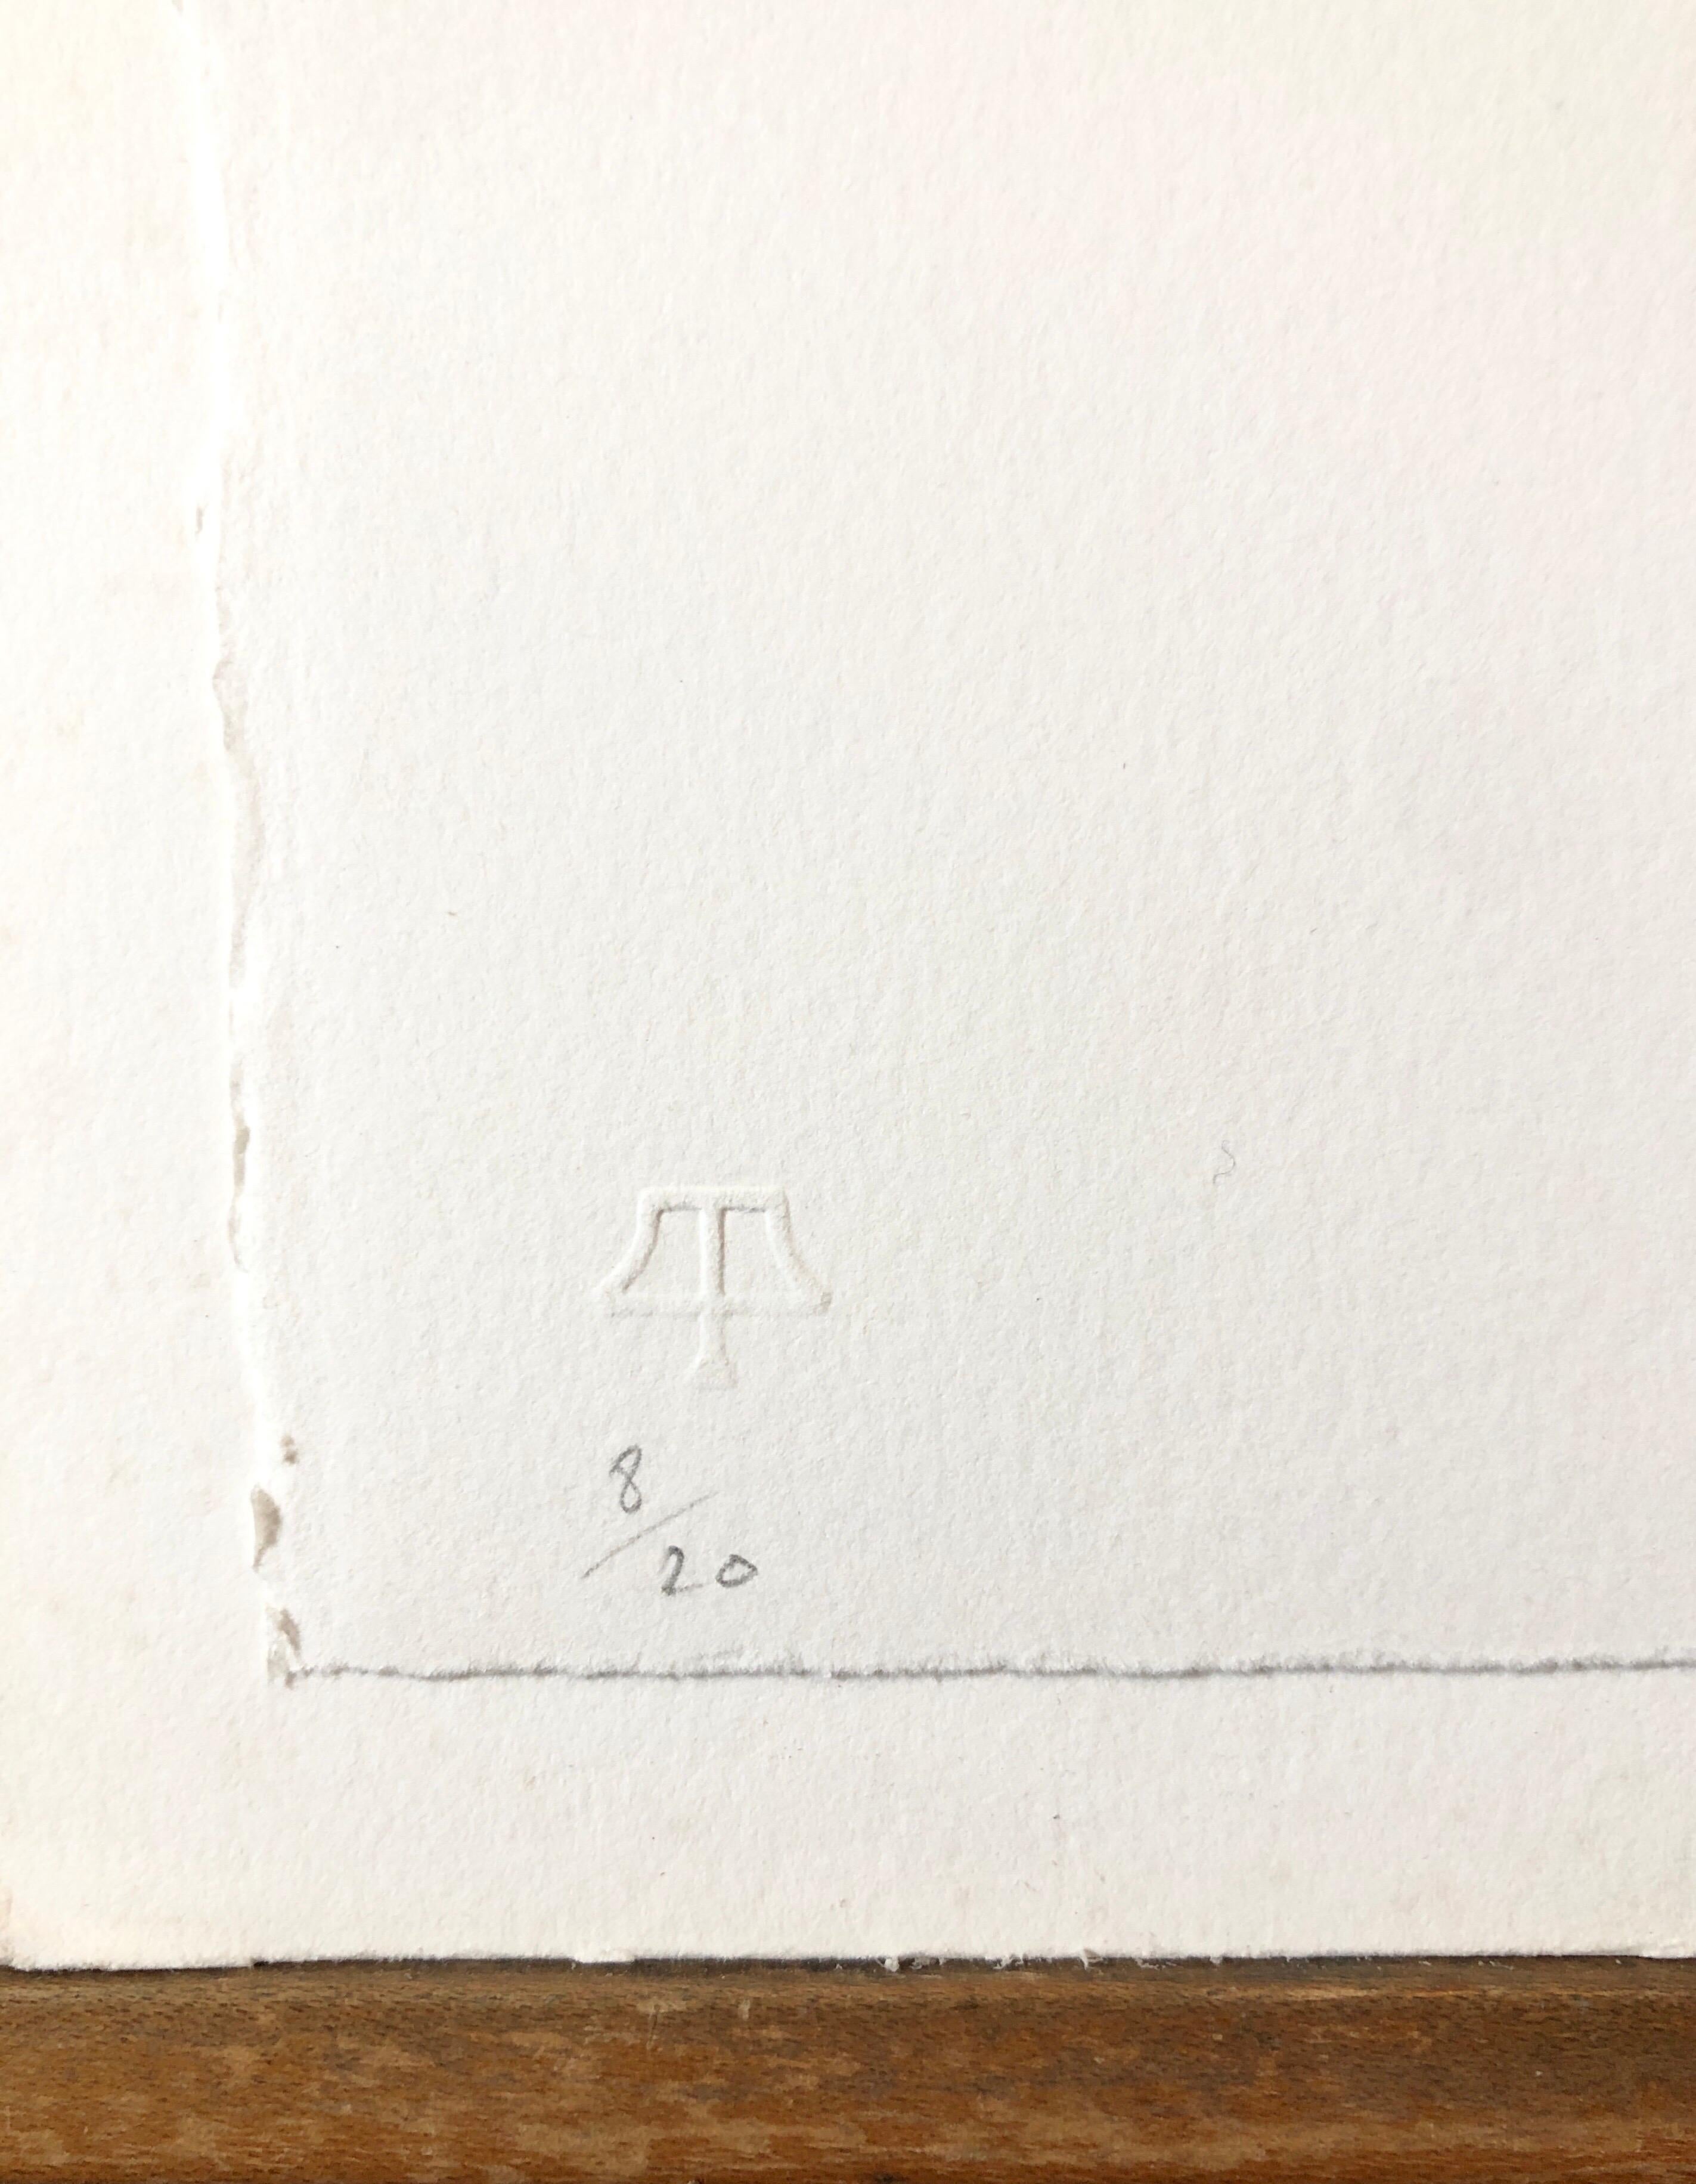 Signed, dated and titled. Initialed and dated lower right, each numbered 8/20, lower left. 9 x 6 image size, 22 x 15 in. sheet size. With the blindstamp of the Tamarind Institute print workshop.
On white Somerset satin paper. 

Belgian American